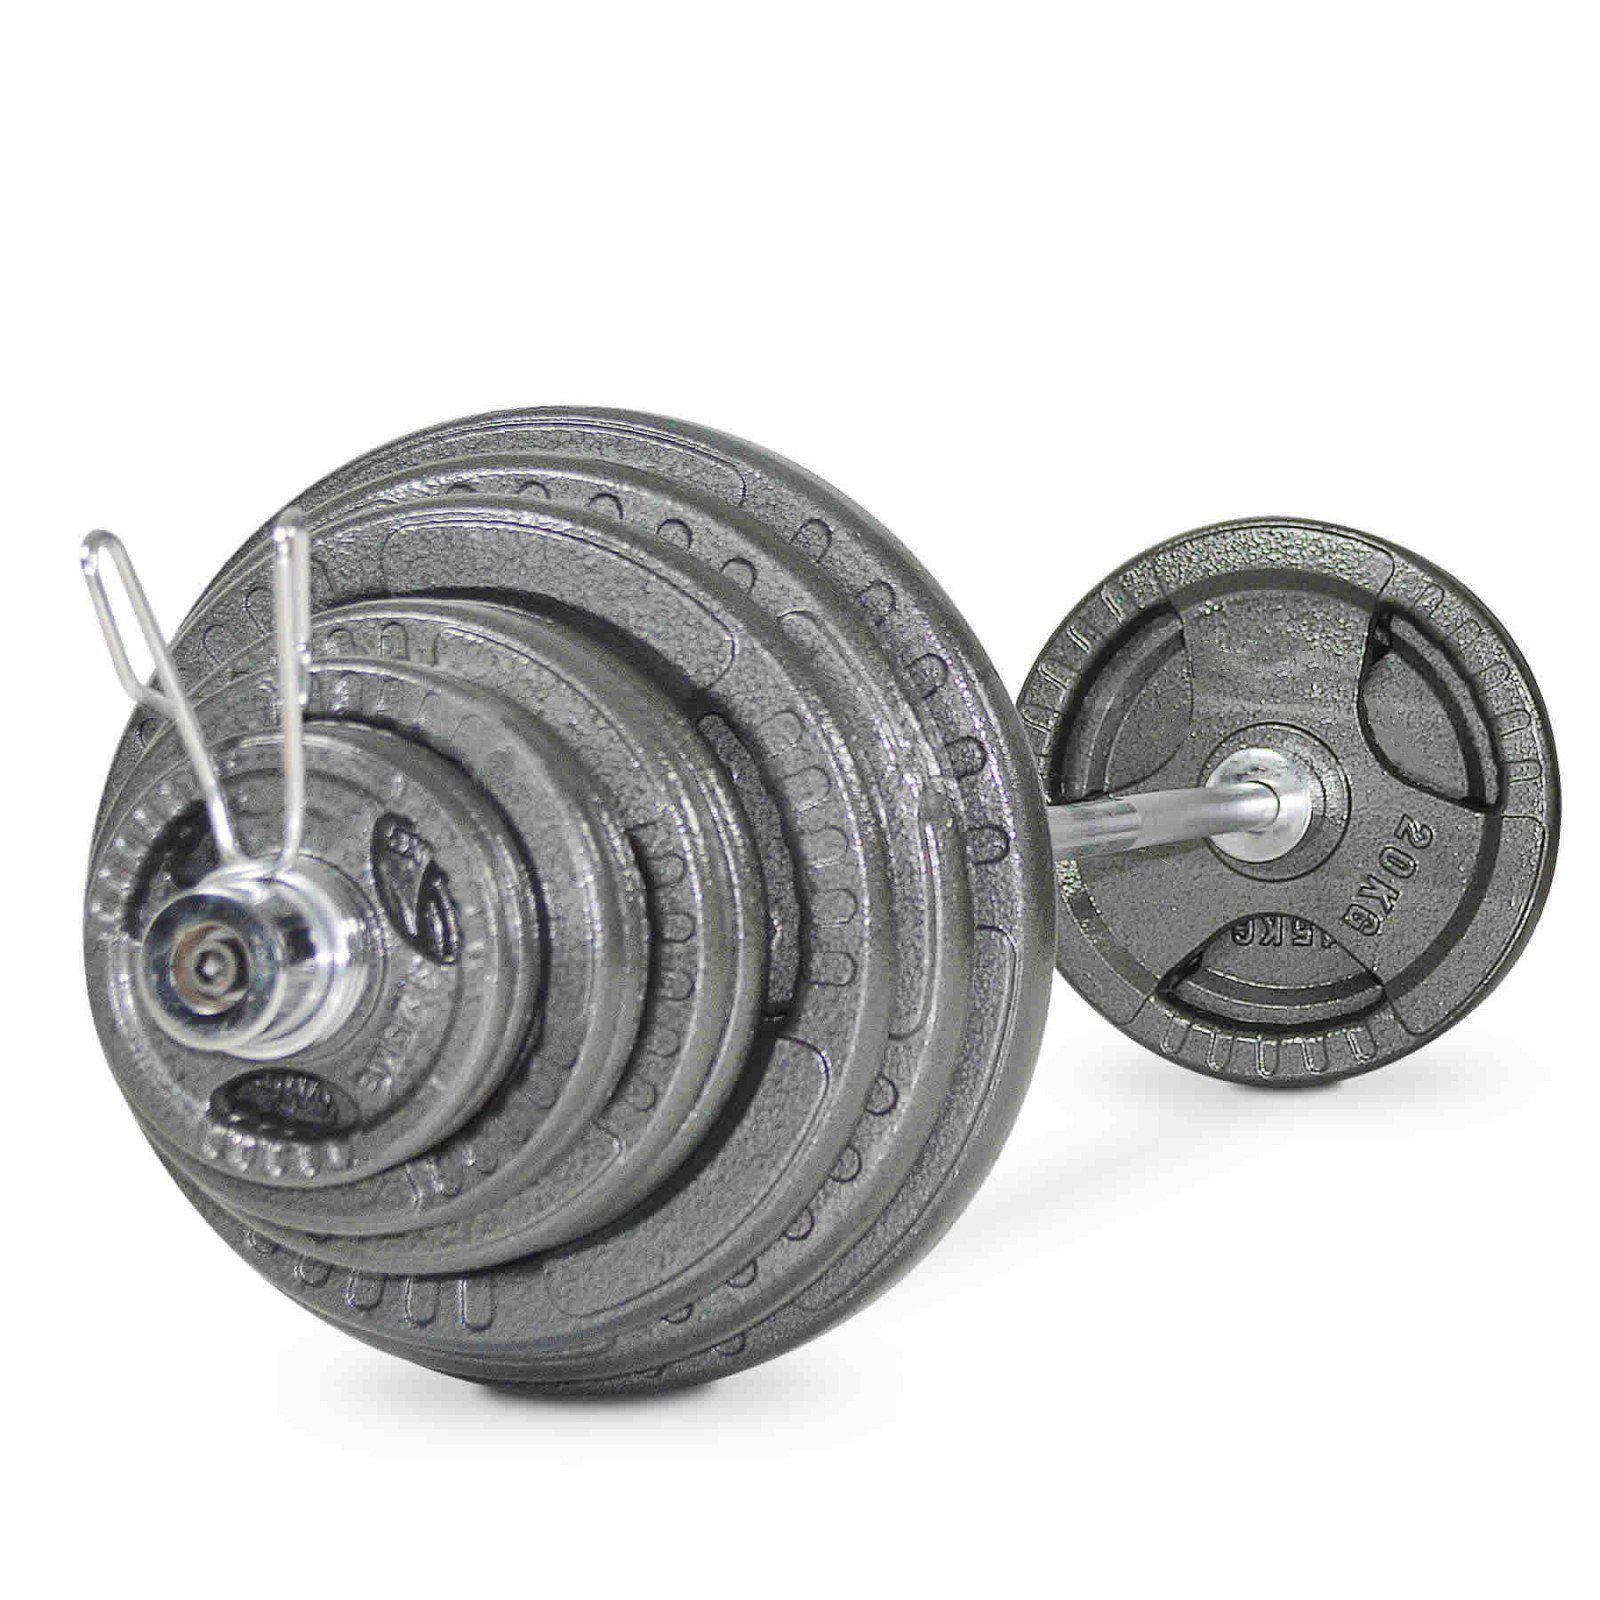 Buy TnP Accessories 2 Olympic Tri-Grip Cast Iron Barbell Sets